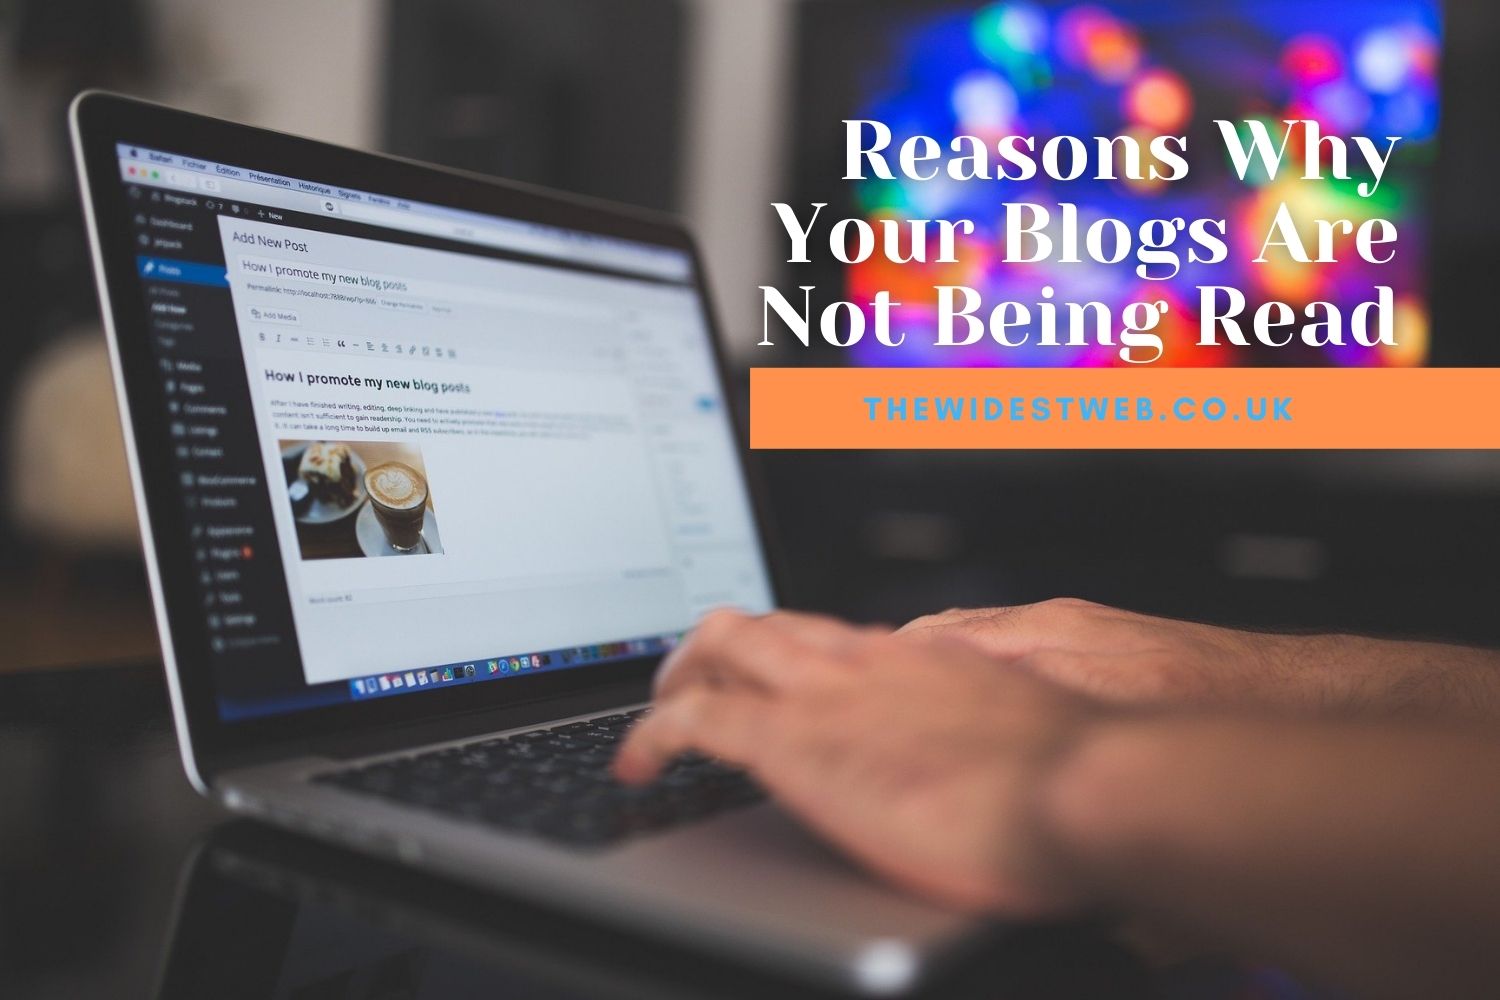 Top 5 Reasons Why Your Blogs Are Not Being Read